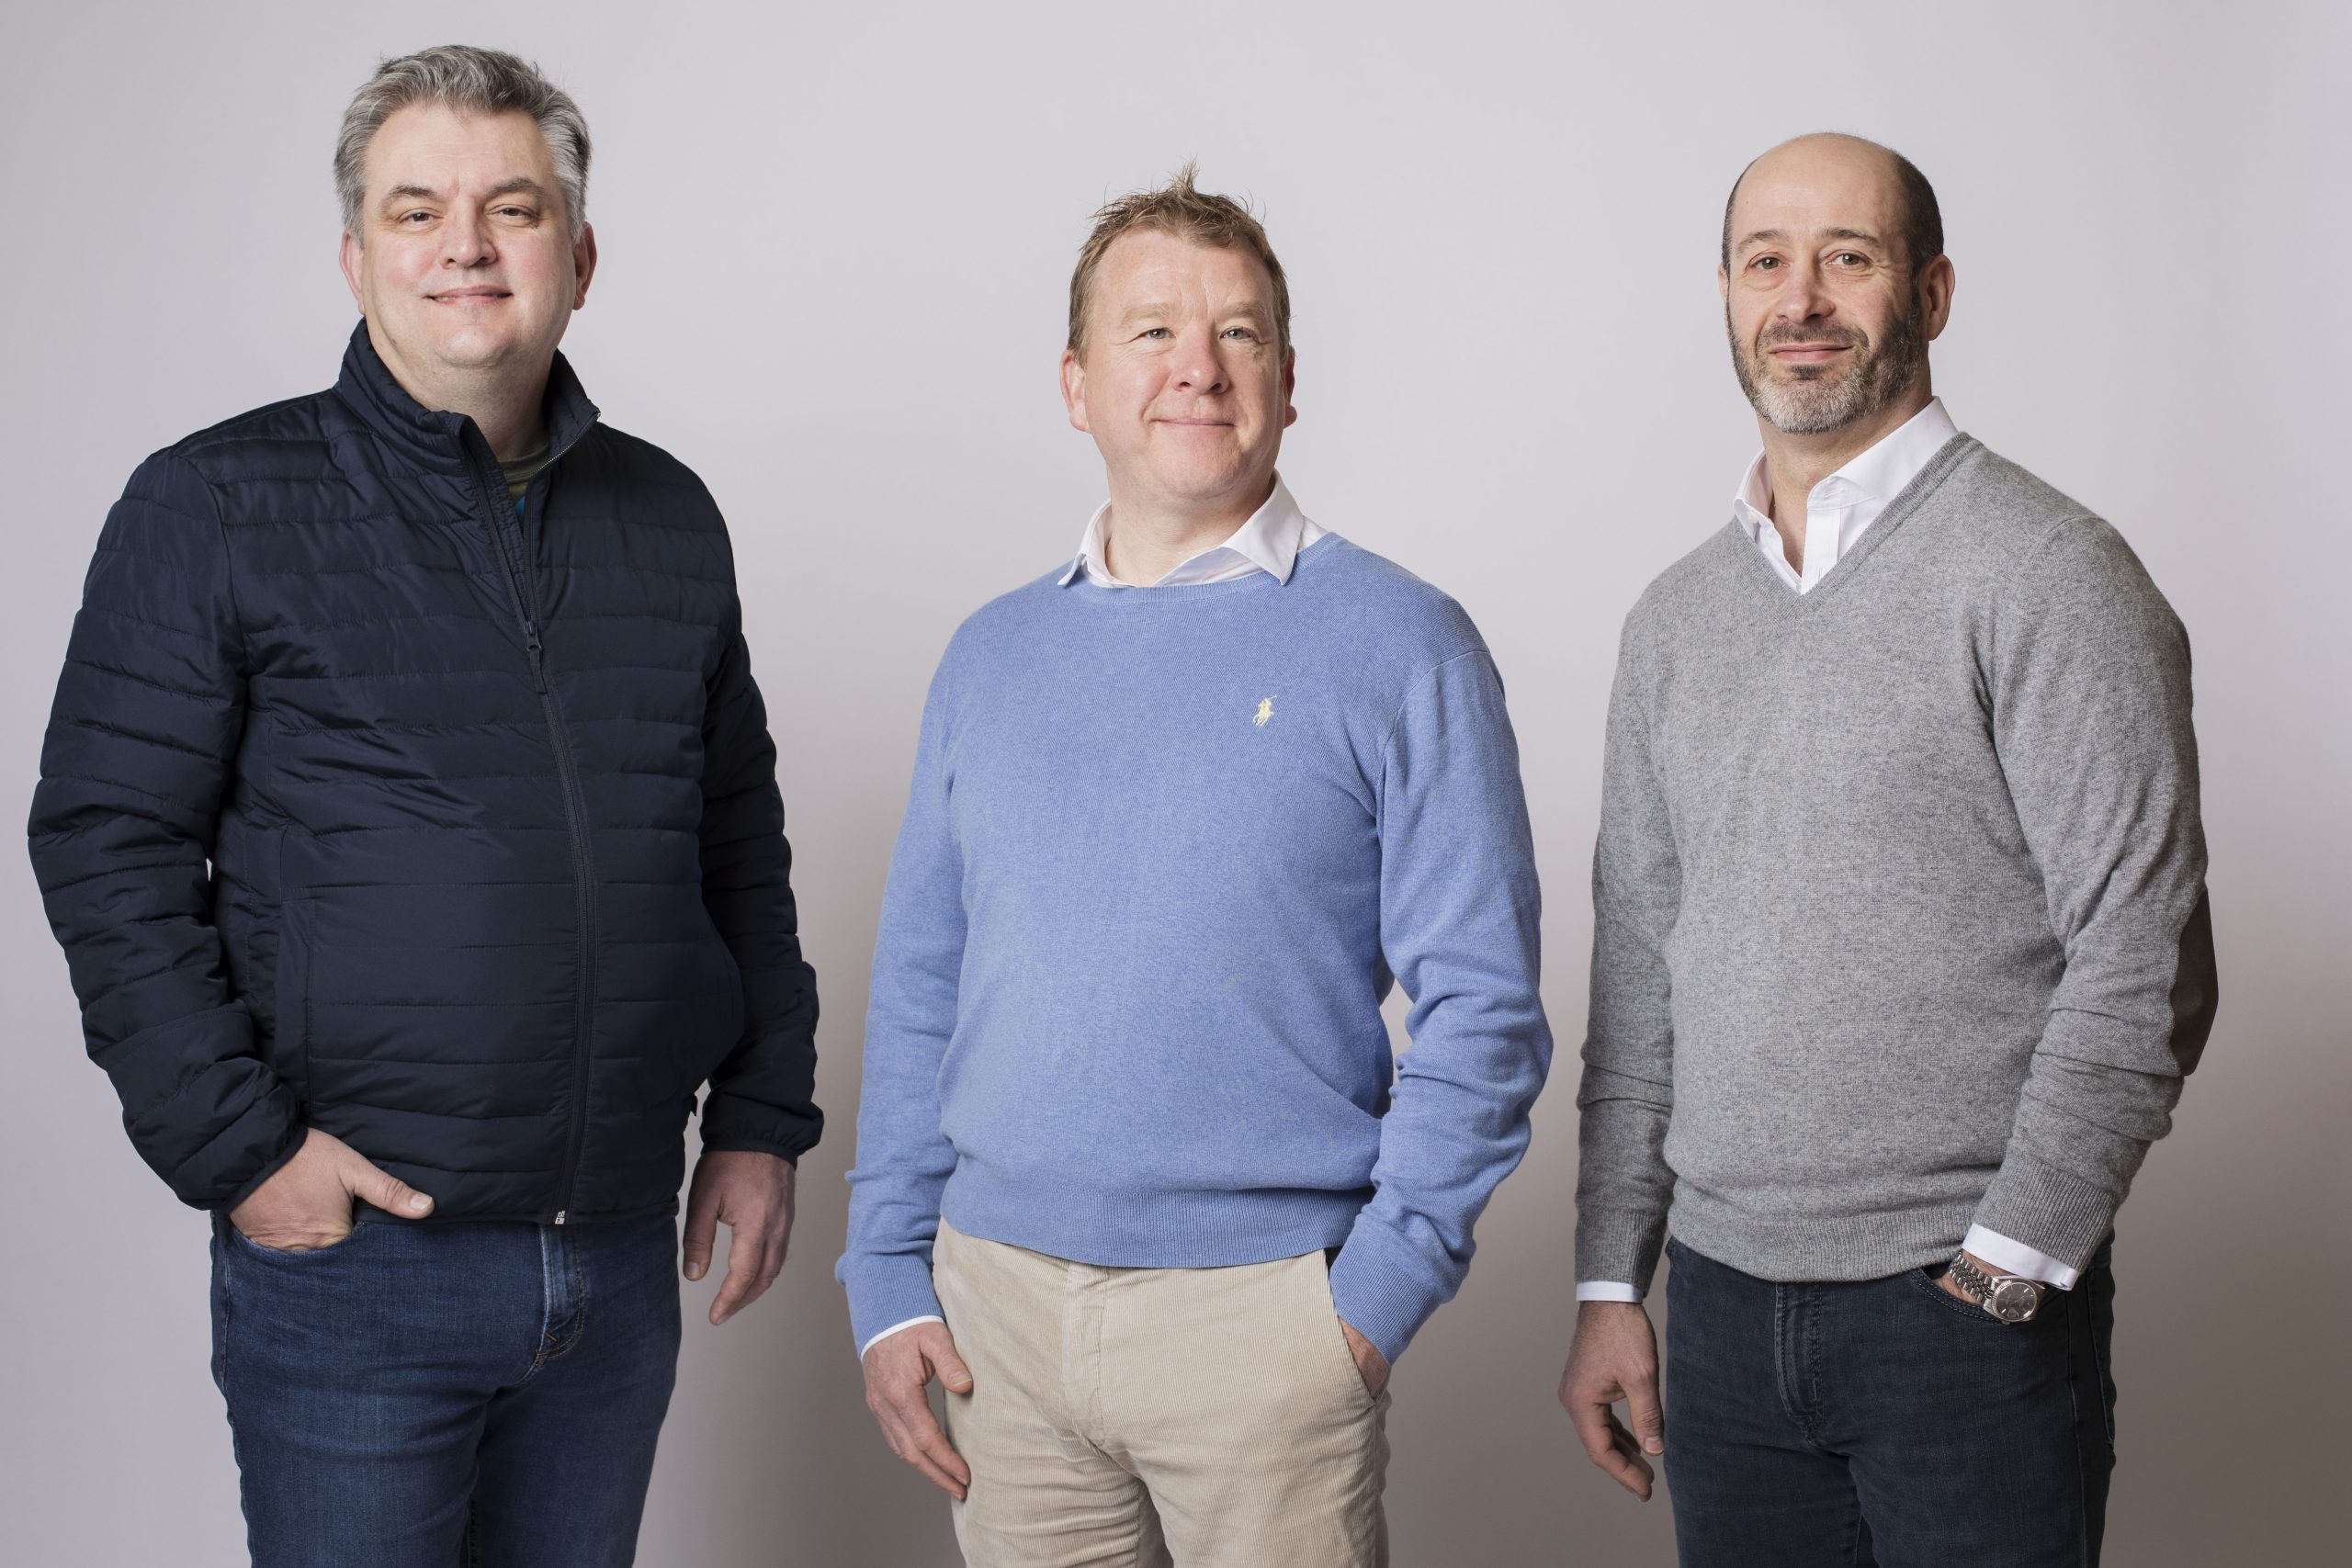 Pictured, from left to right, are Richard Brown, Melius Cyber chief executive; Steve Cowie, non- executive director; Matt Little, chair; Eldon Jobe, chief commercial officer; and David McPherson, chief technology officer